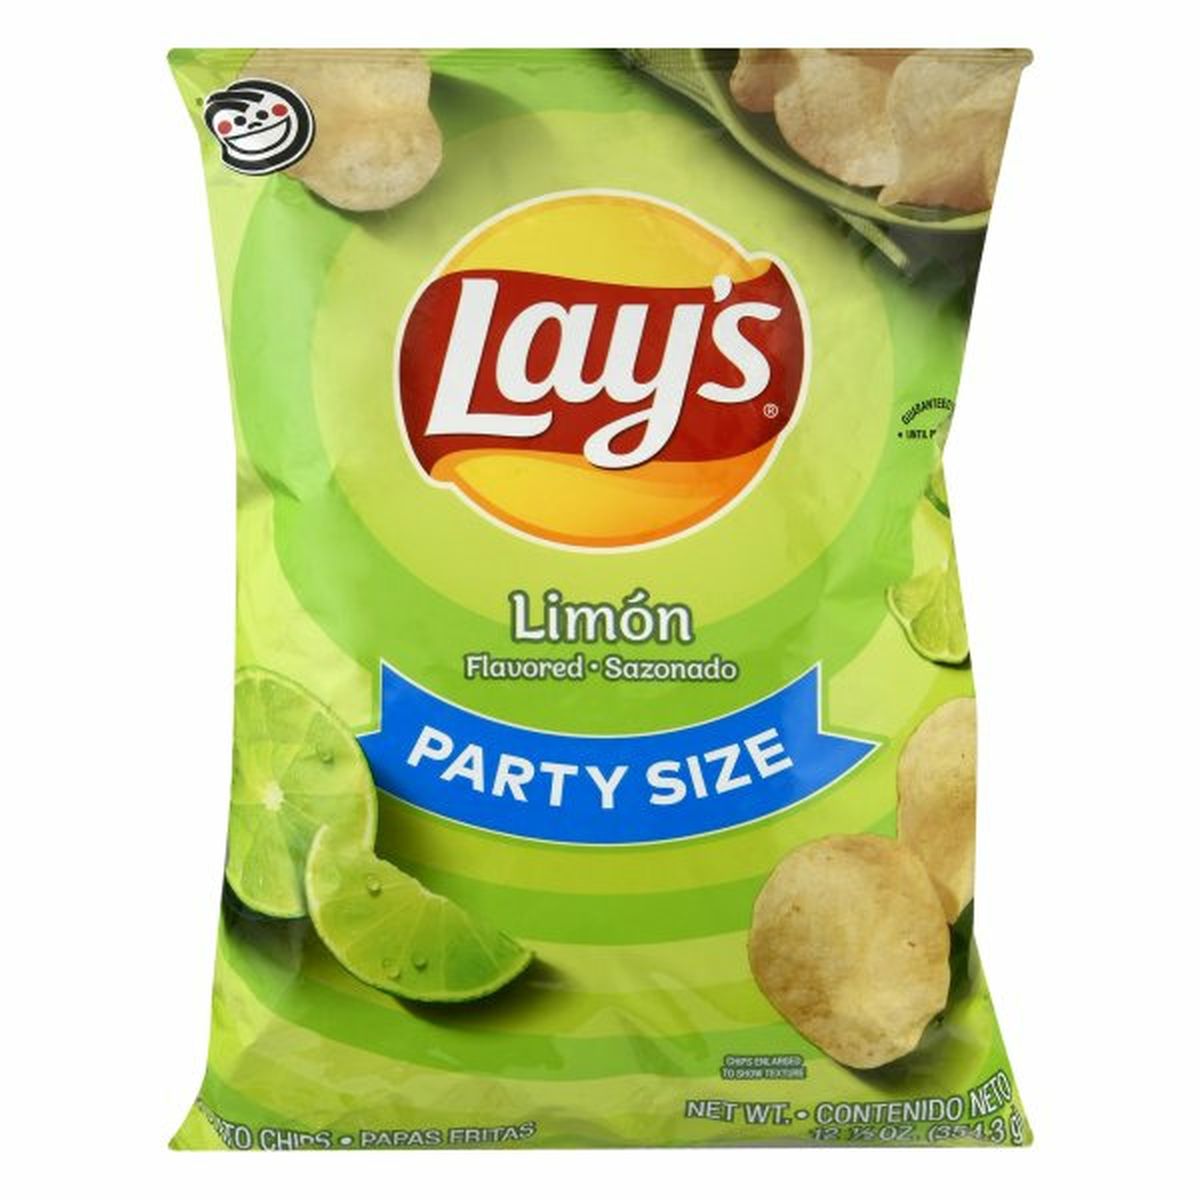 Calories in Lay's Potato Chips, Limon Flavored, Party Size